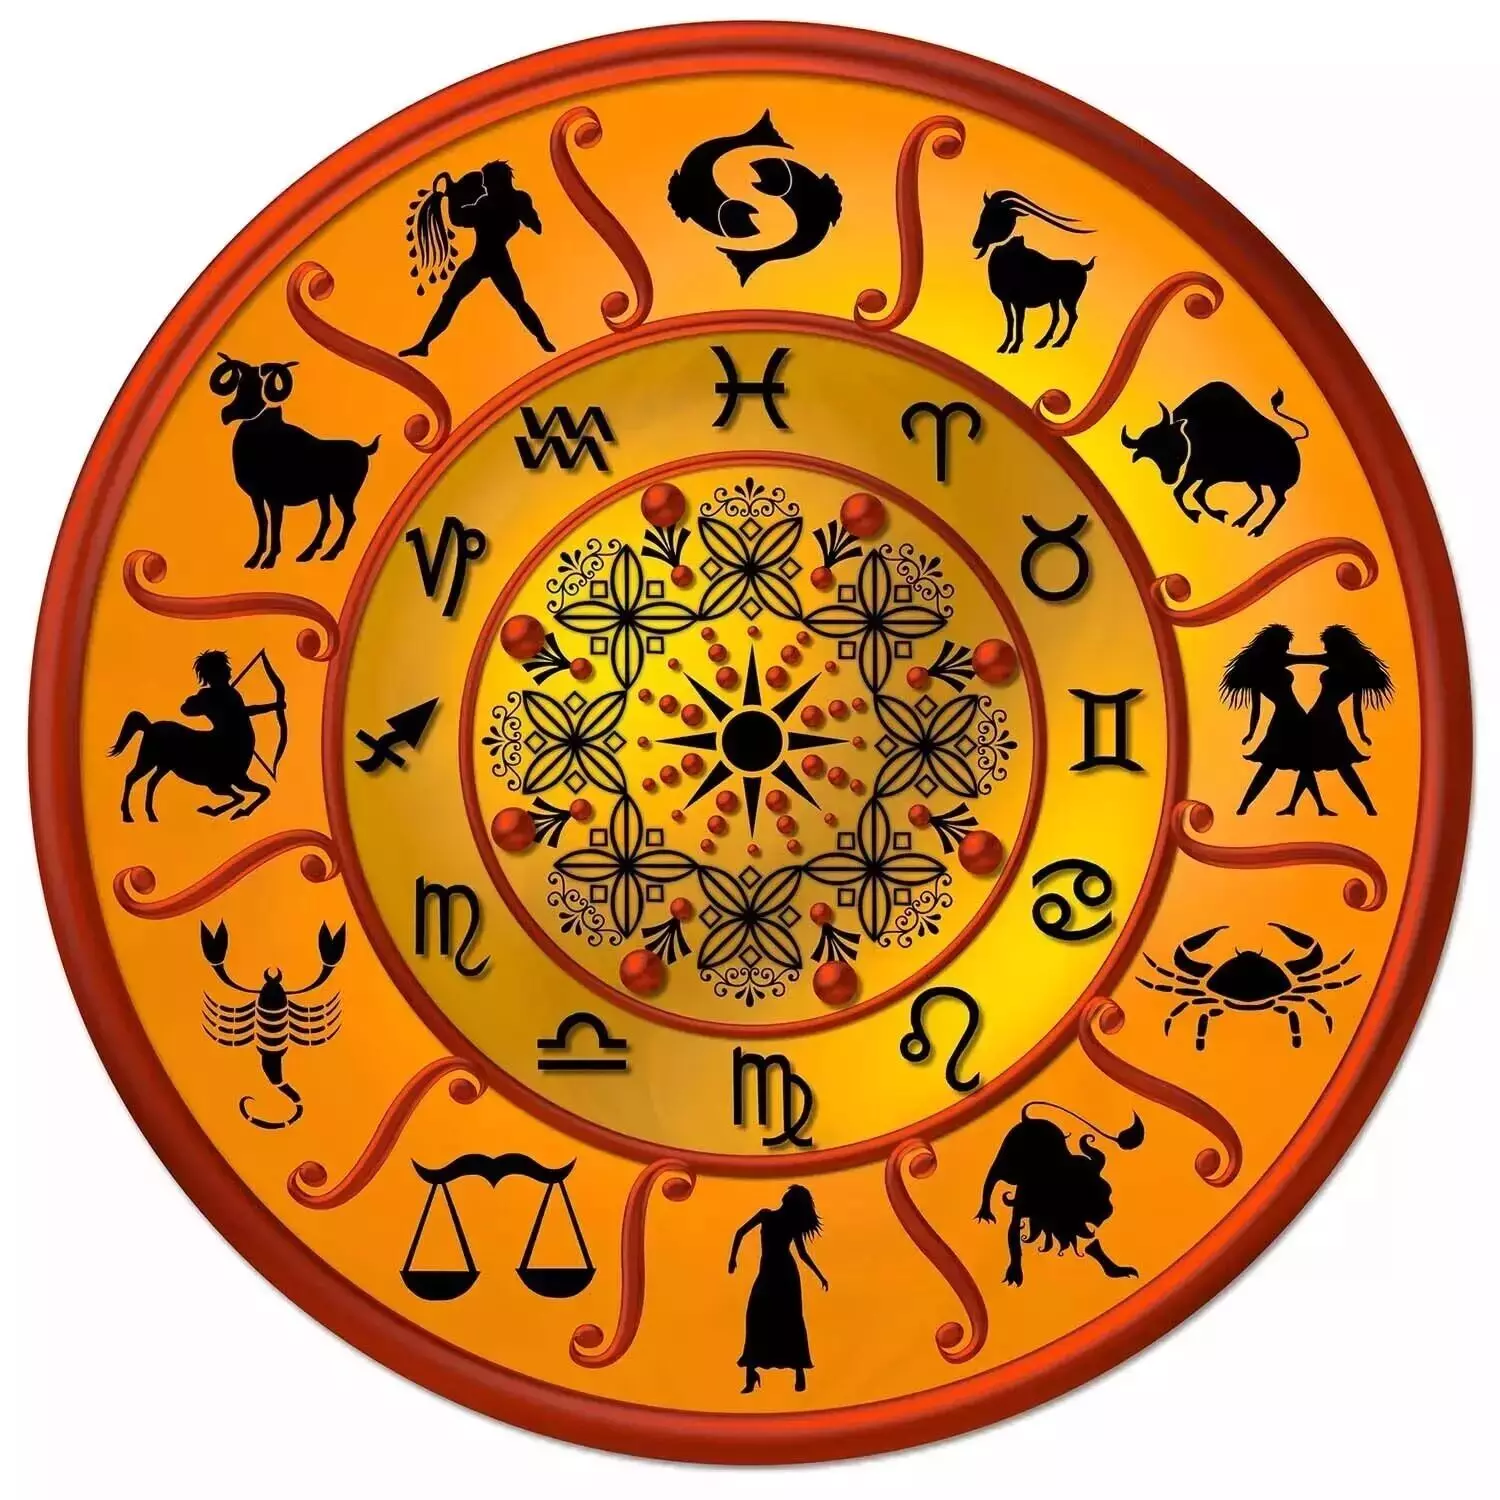 08 June  – Know your todays horoscope